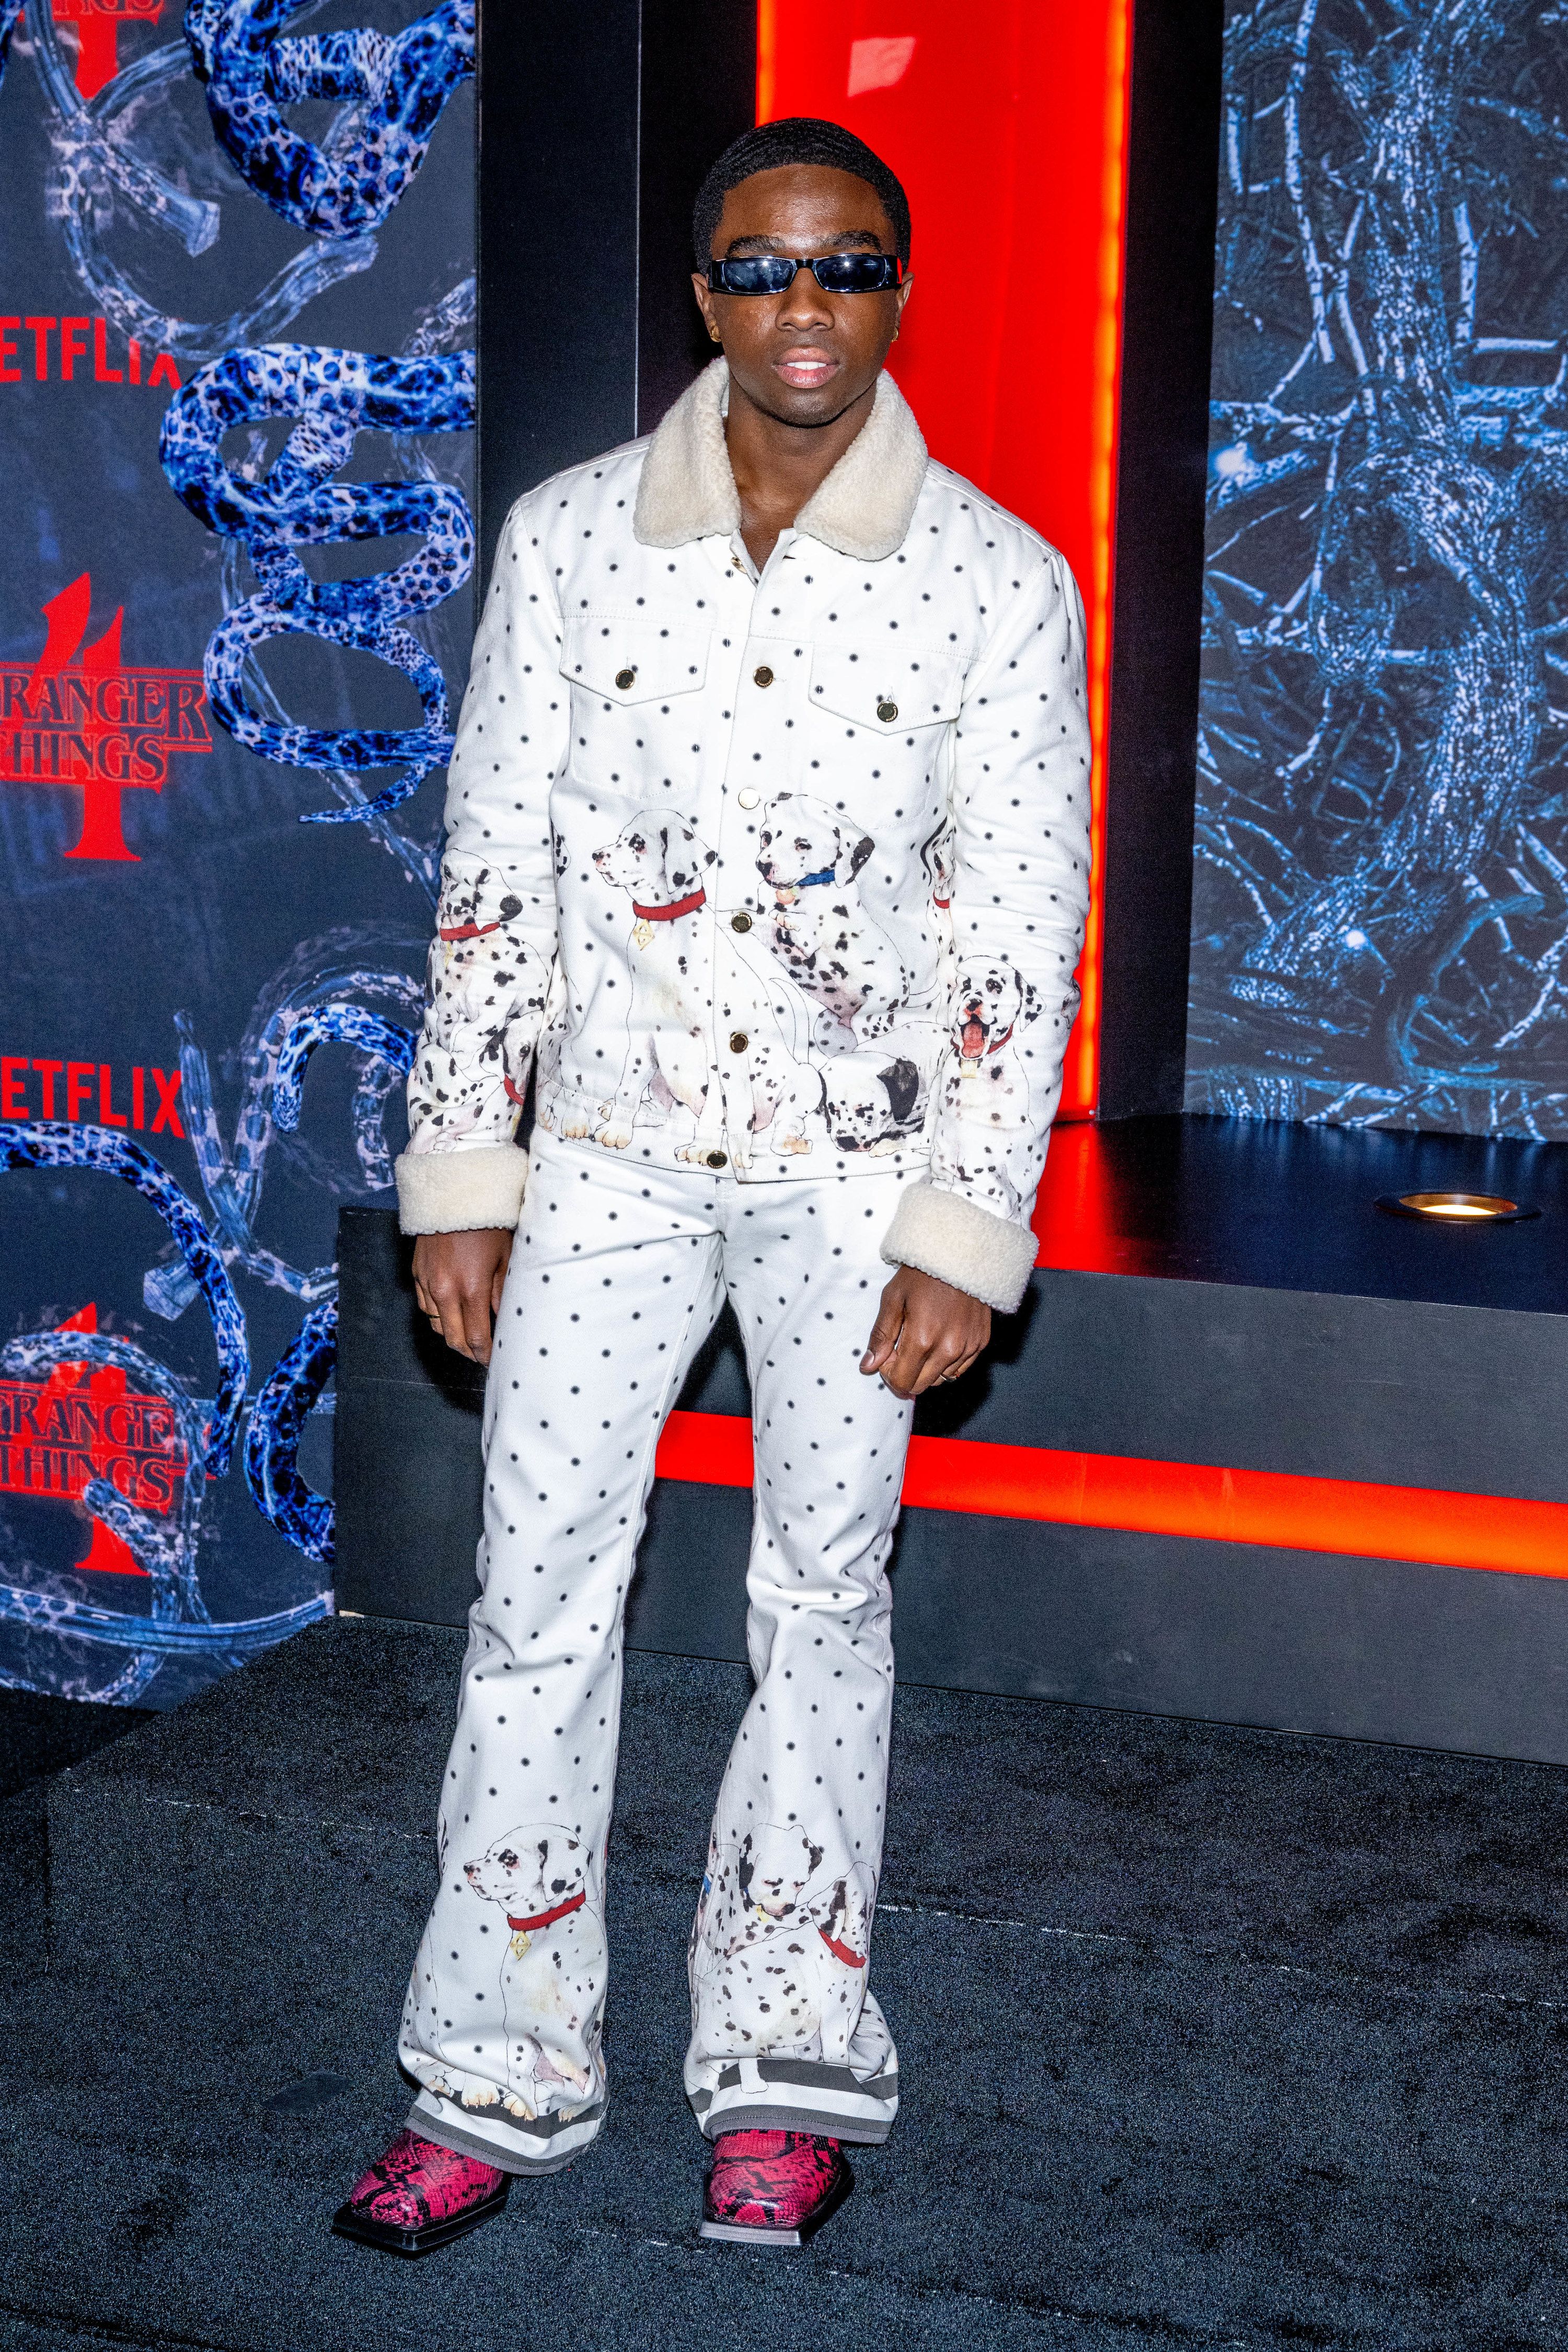 Caleb looking much older and wearing sunglasses, a polka dot suit with Dalmatians on it, and bellbottom pants with bright red and black shoes